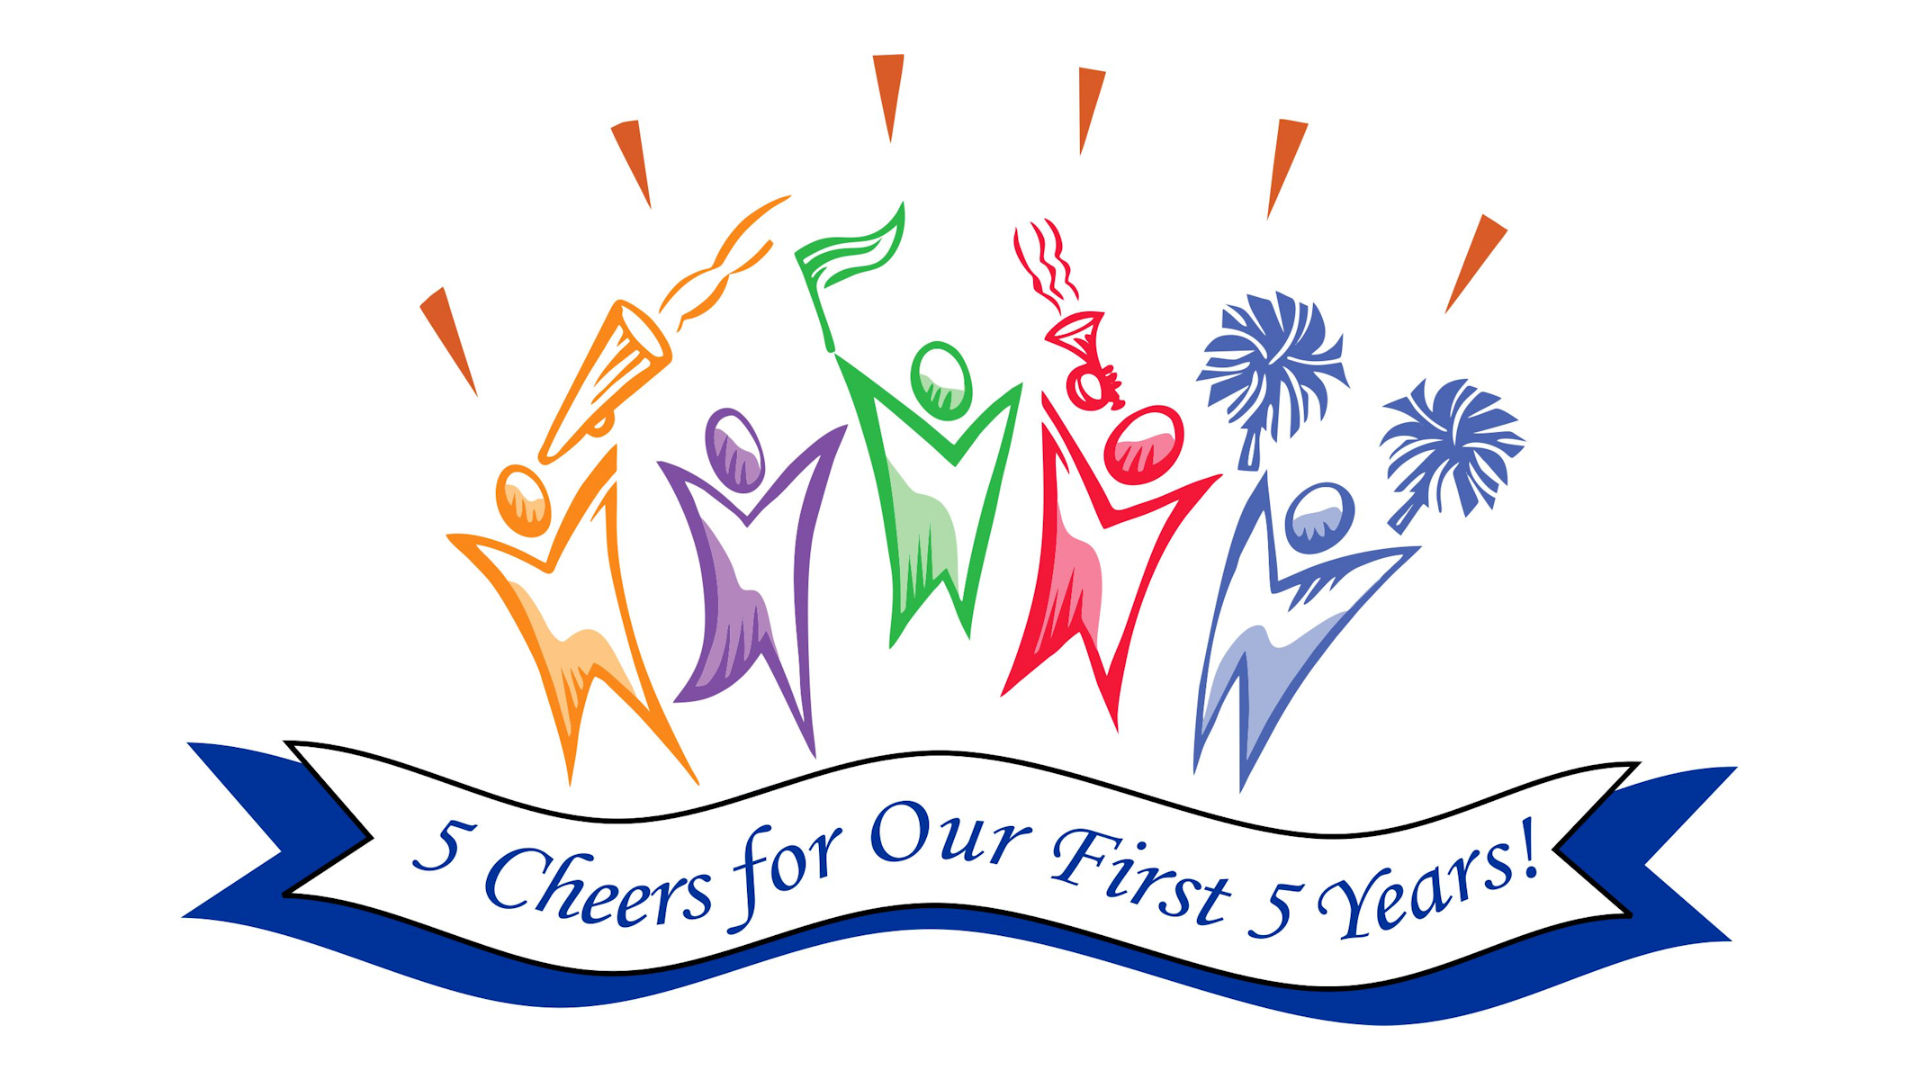 5 Cheers For Our First 5 Years | Migration Resource Center